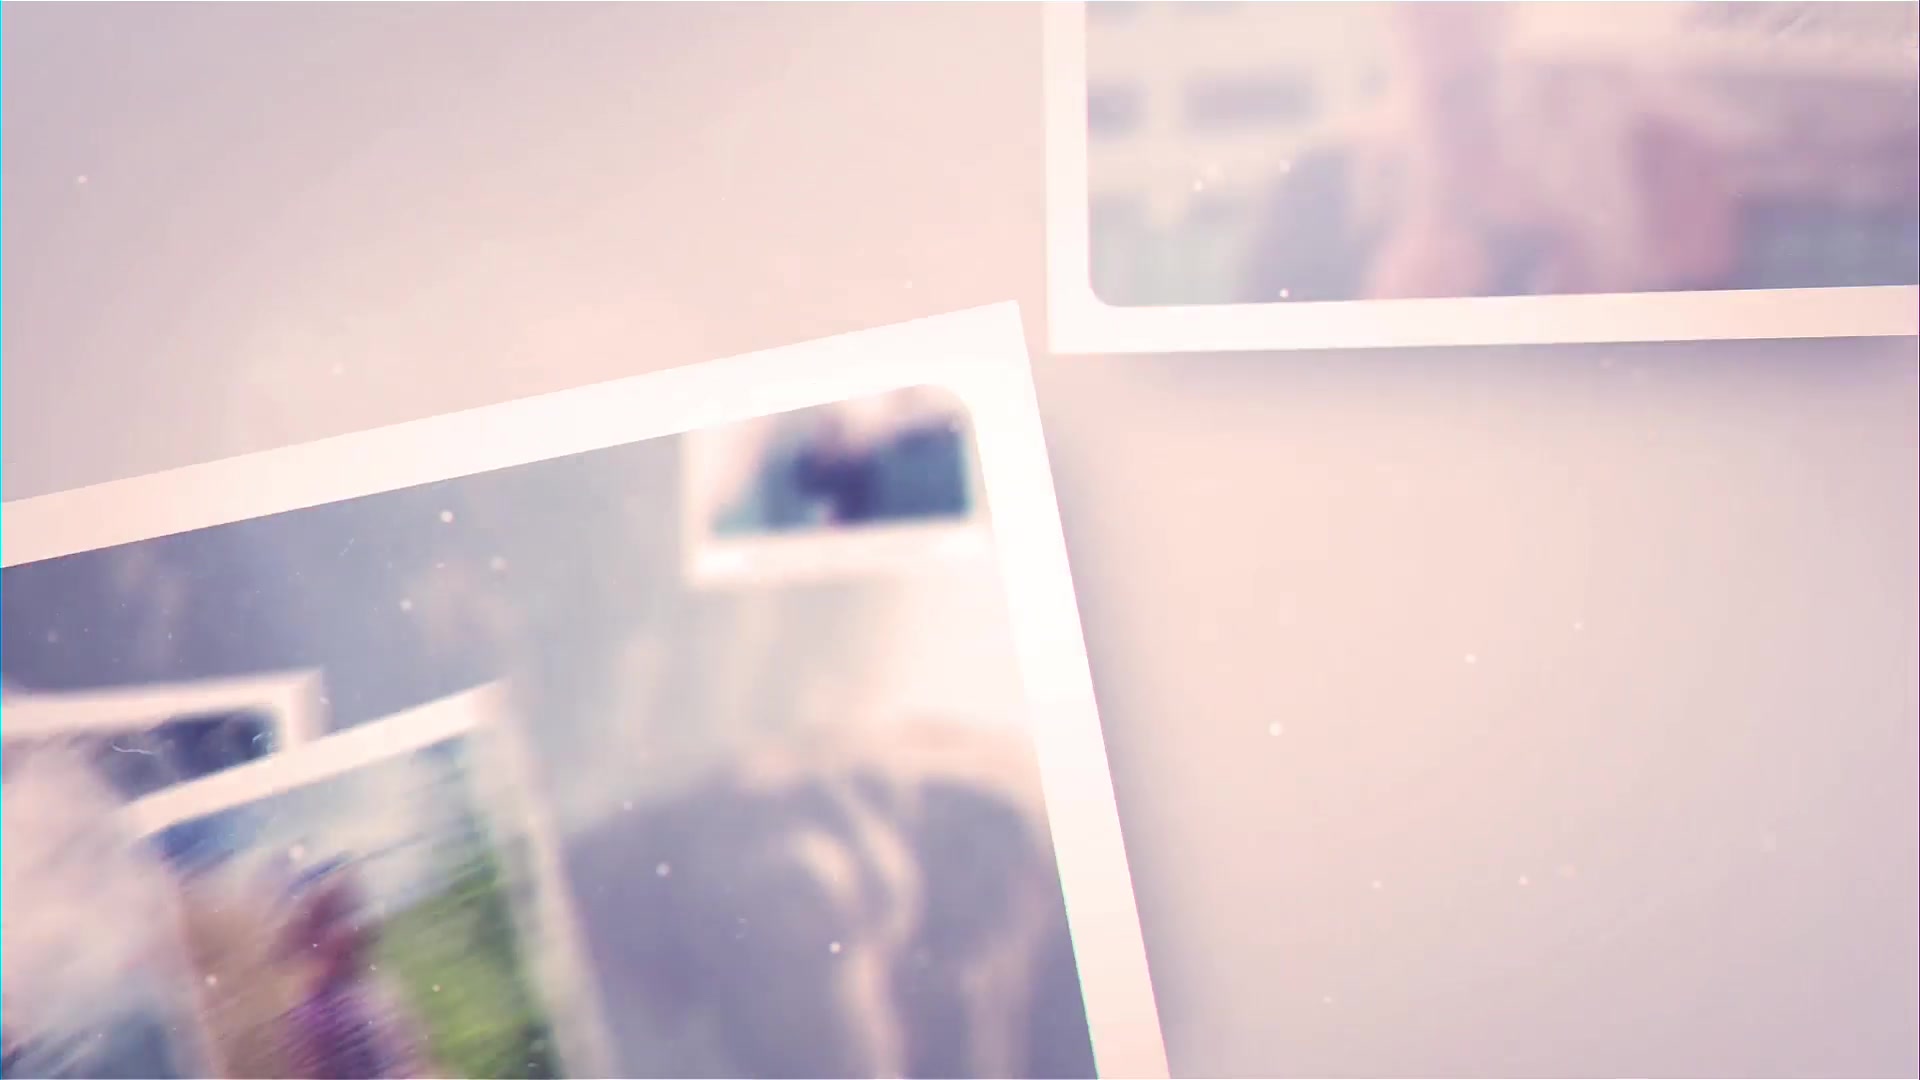 Memory Frames - Download Videohive 22628198